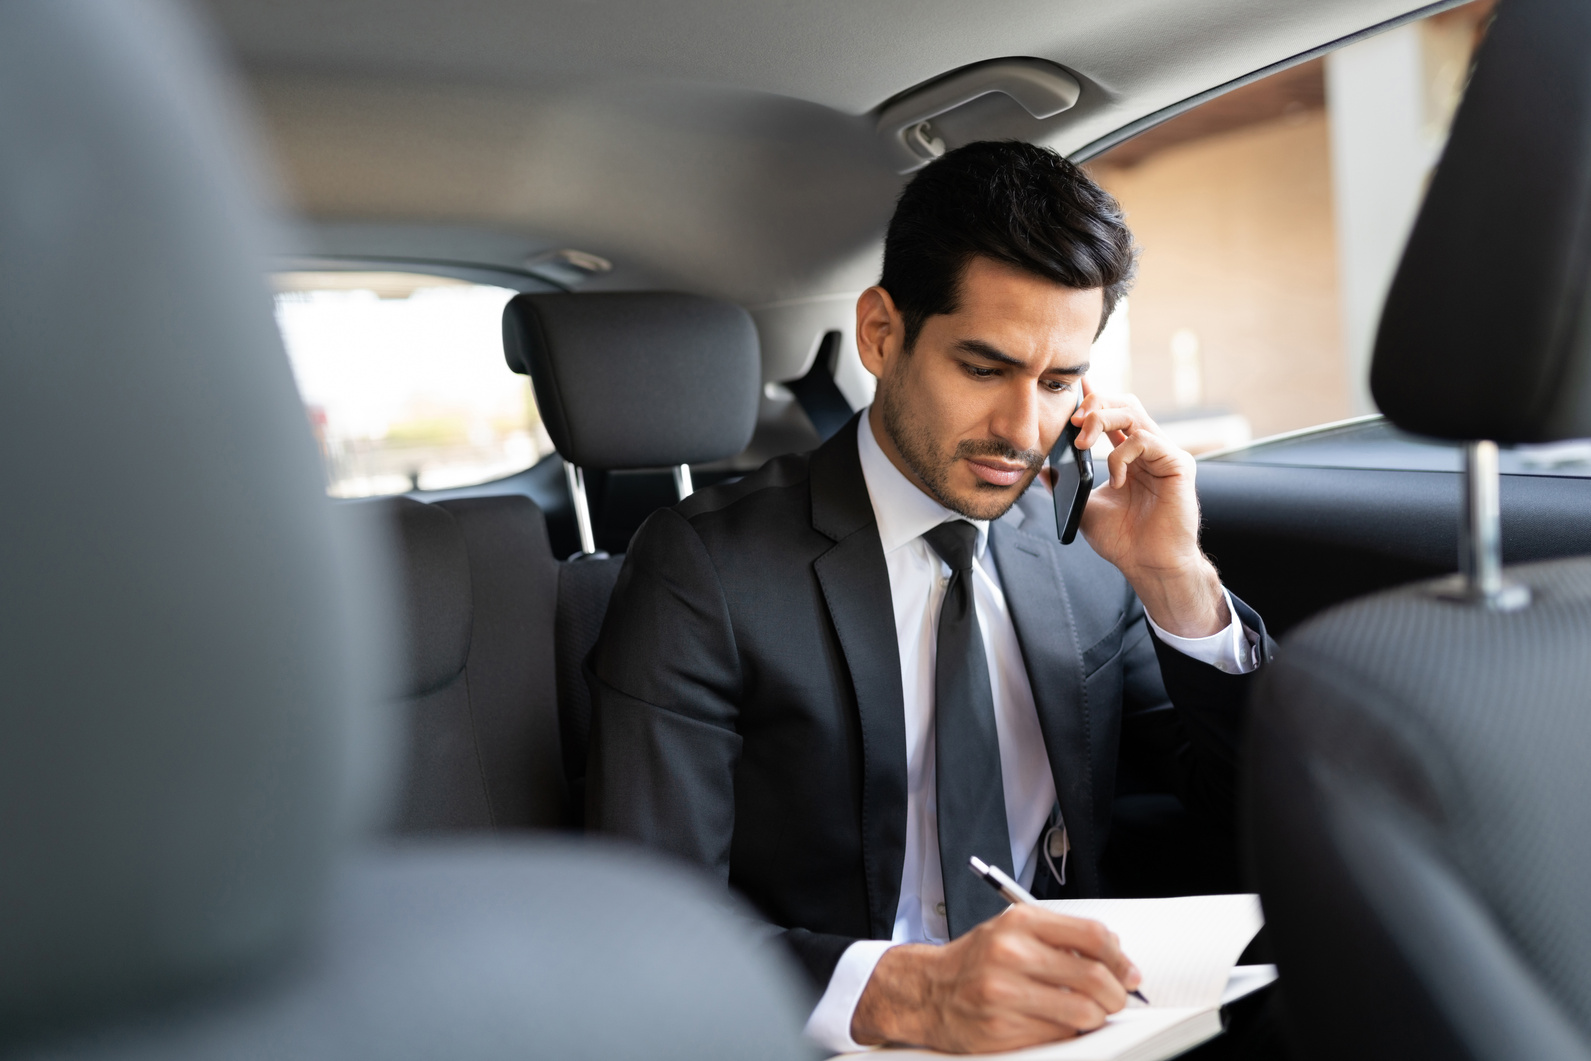 Business Executive Talking On Mobile Phone In Car